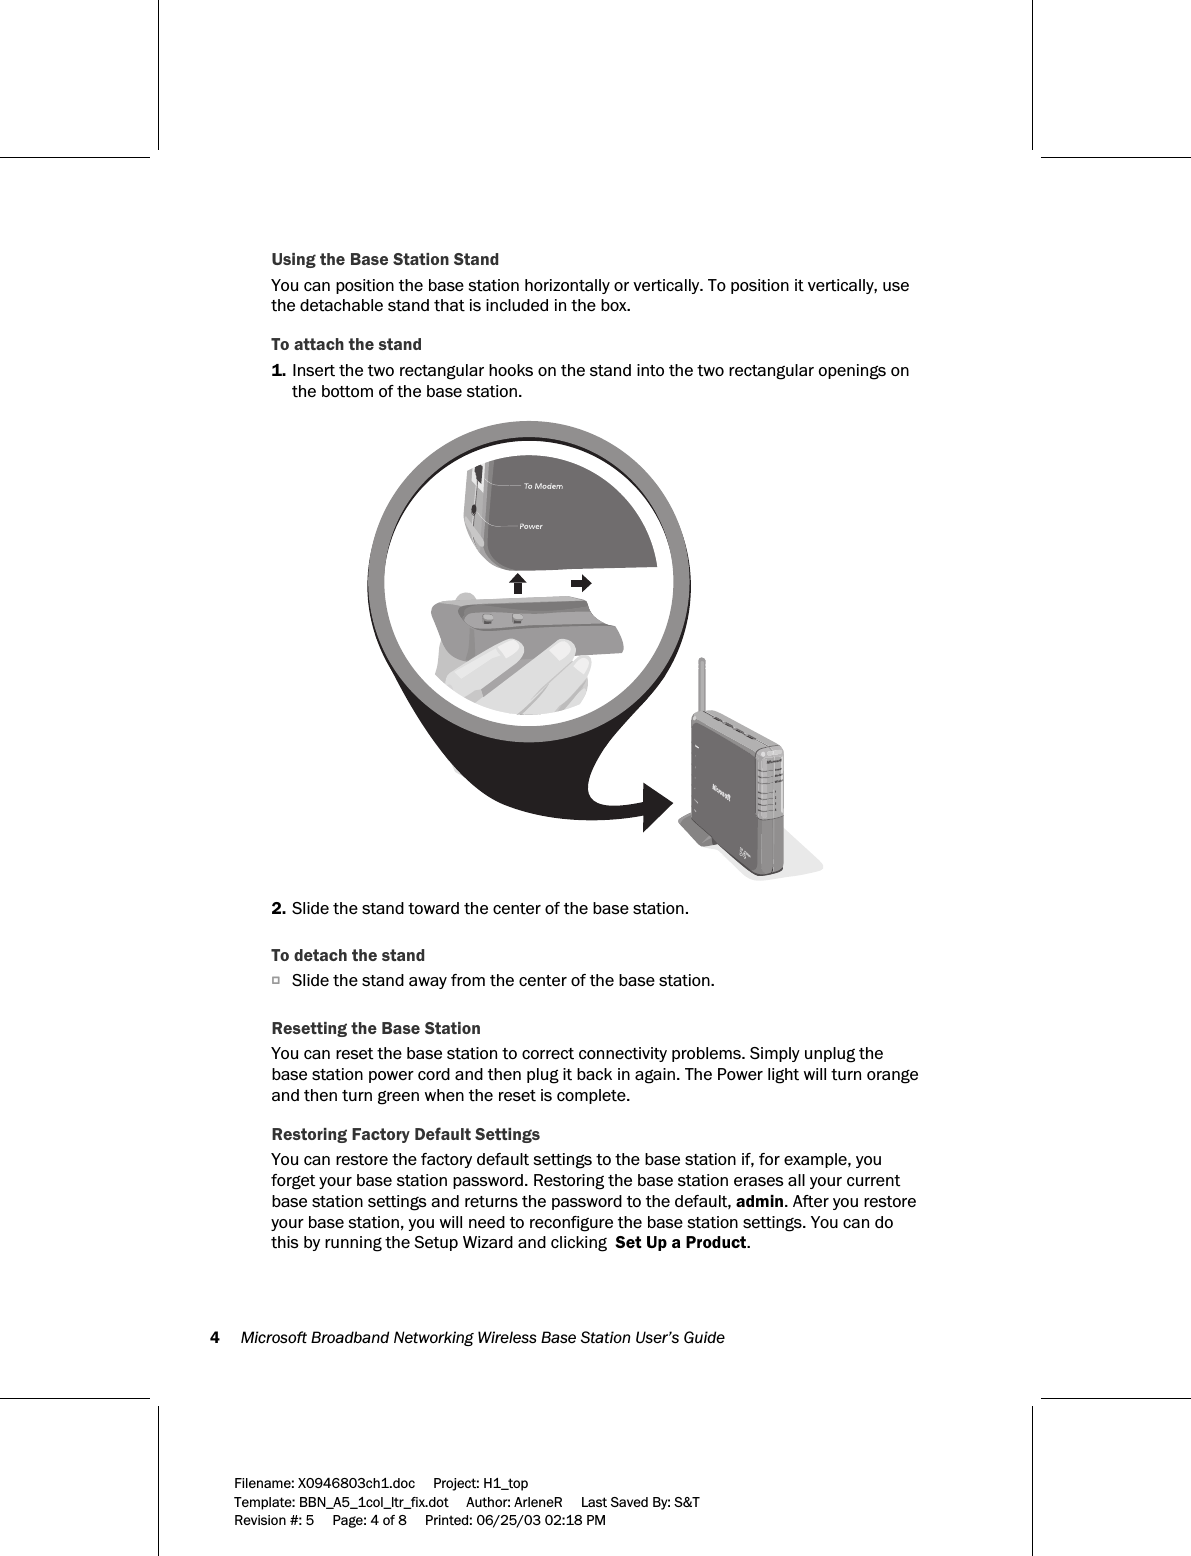 4     Microsoft Broadband Networking Wireless Base Station User’s Guide  Filename: X0946803ch1.doc     Project: H1_top    Template: BBN_A5_1col_ltr_fix.dot     Author: ArleneR     Last Saved By: S&amp;T Revision #: 5     Page: 4 of 8     Printed: 06/25/03 02:18 PM  Using the Base Station Stand You can position the base station horizontally or vertically. To position it vertically, use the detachable stand that is included in the box. To attach the stand 1. Insert the two rectangular hooks on the stand into the two rectangular openings on the bottom of the base station.    2. Slide the stand toward the center of the base station.    To detach the stand O Slide the stand away from the center of the base station.    Resetting the Base Station You can reset the base station to correct connectivity problems. Simply unplug the base station power cord and then plug it back in again. The Power light will turn orange and then turn green when the reset is complete.  Restoring Factory Default Settings You can restore the factory default settings to the base station if, for example, you forget your base station password. Restoring the base station erases all your current base station settings and returns the password to the default, admin. After you restore your base station, you will need to reconfigure the base station settings. You can do this by running the Setup Wizard and clicking  Set Up a Product. 